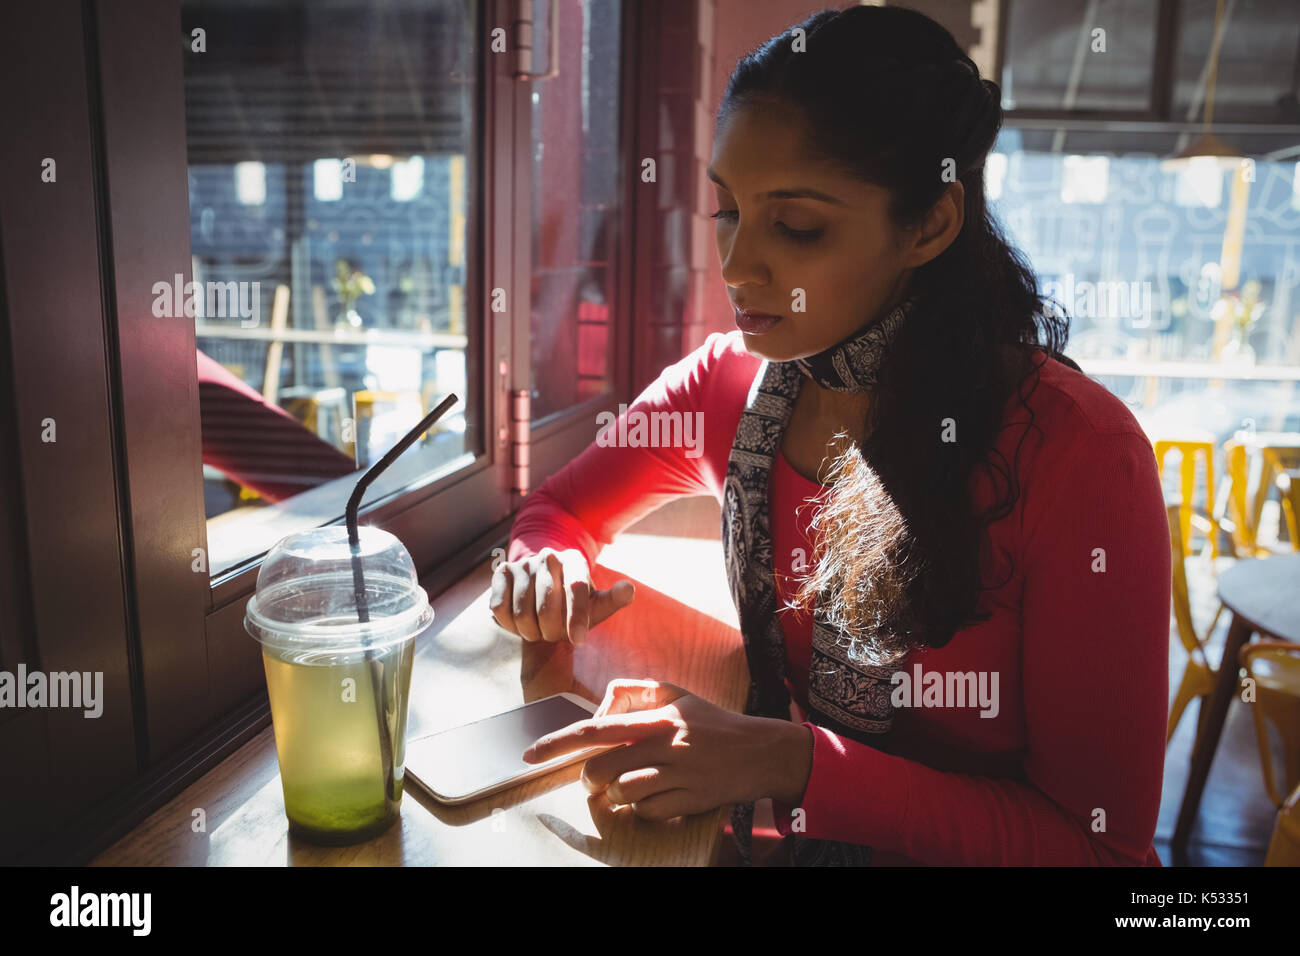 Young woman with drink using phone at window sill in cafe Stock Photo